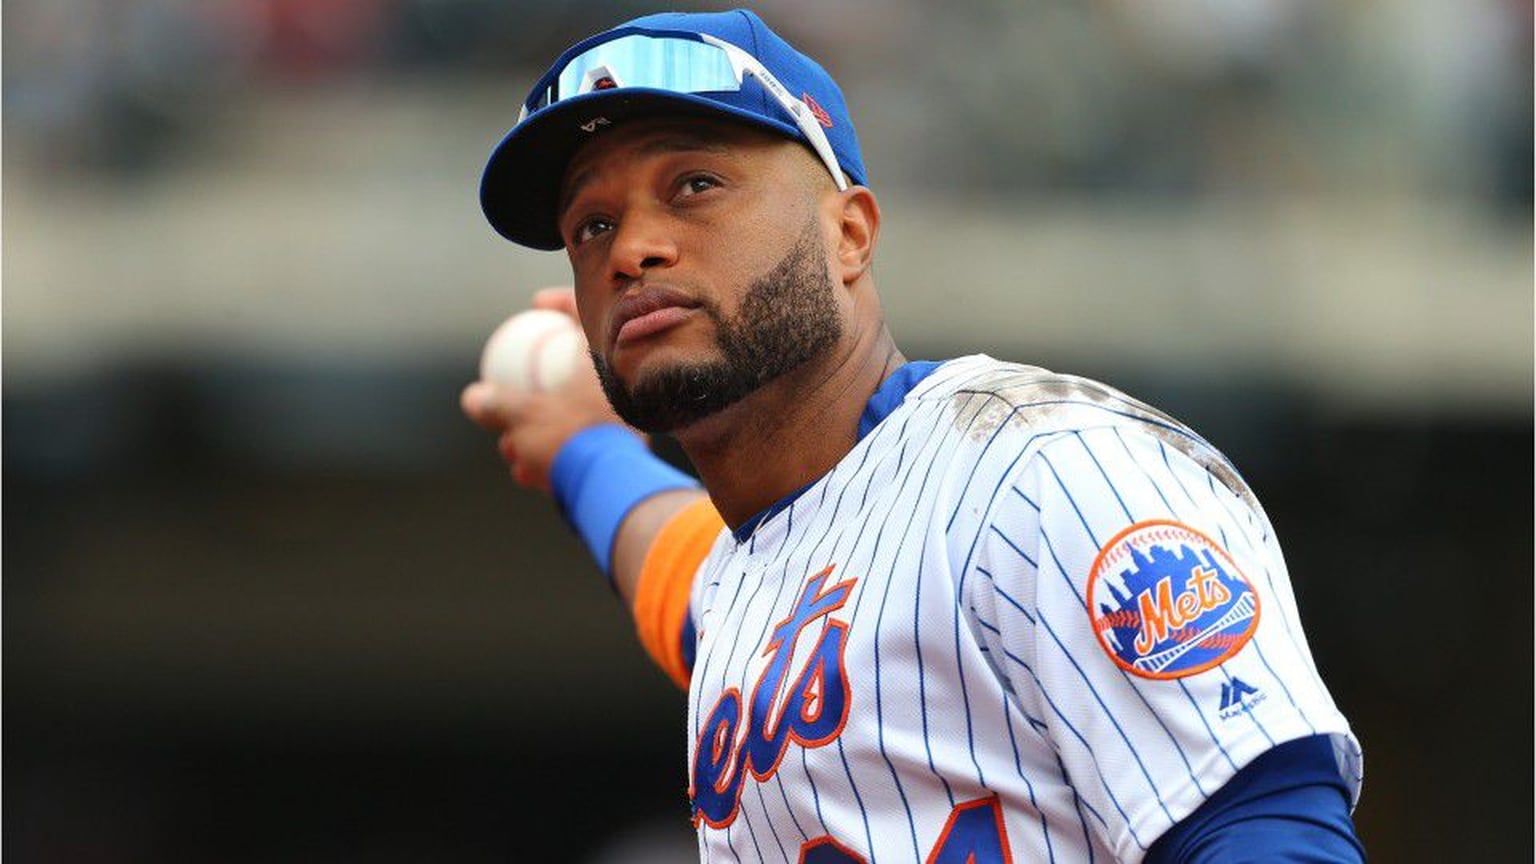 Mets' 2B Robinson Cano suspended for all of 2021 season after